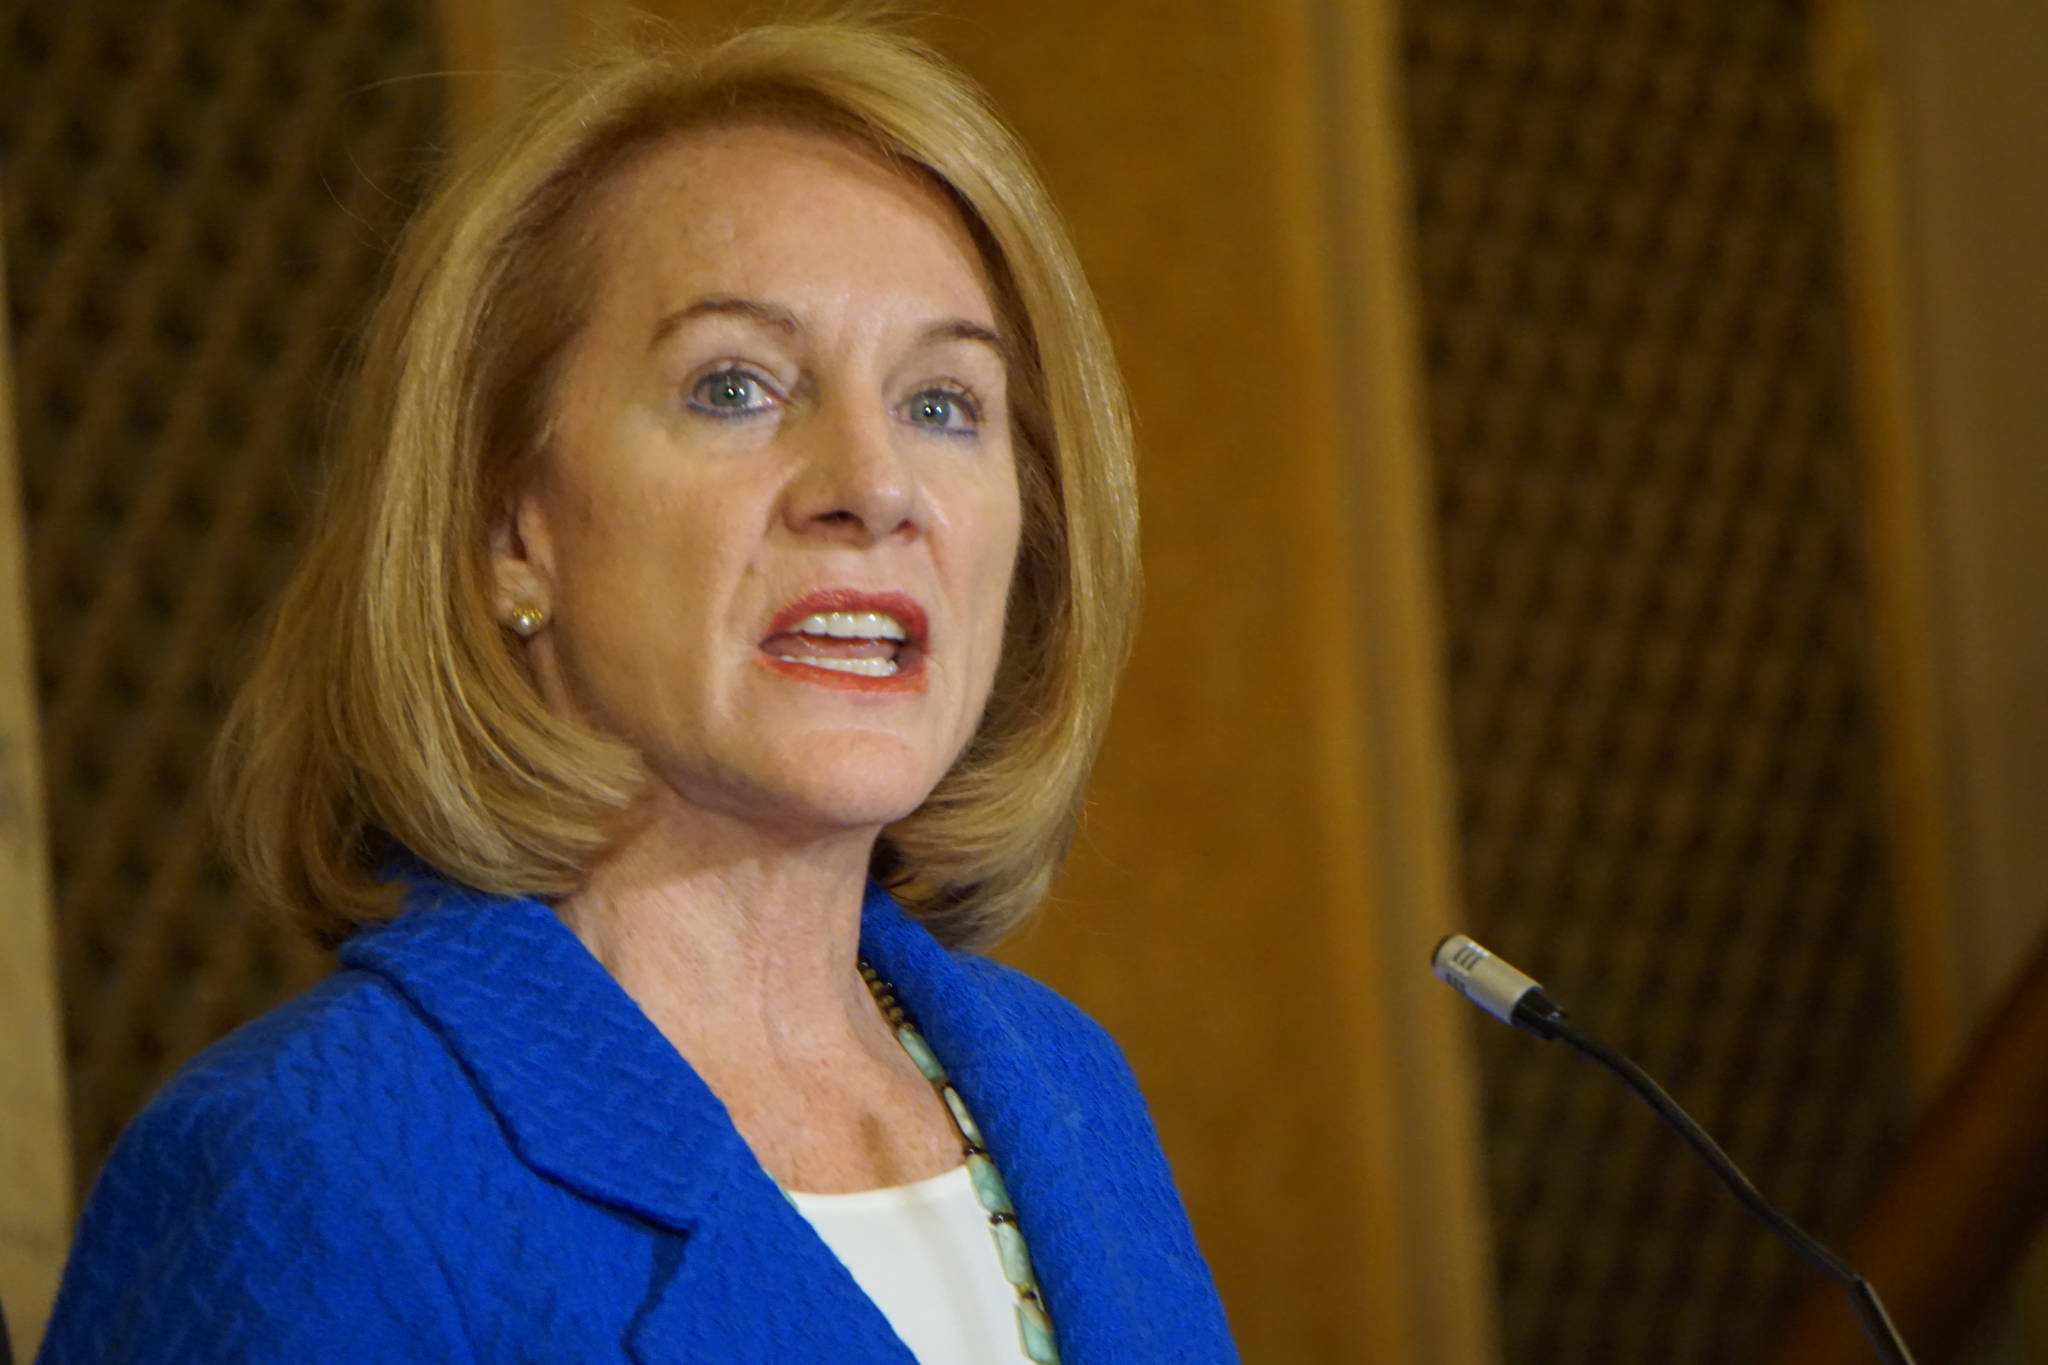 What Jenny Durkan’s Time as U.S. Attorney Says About Her As a Candidate